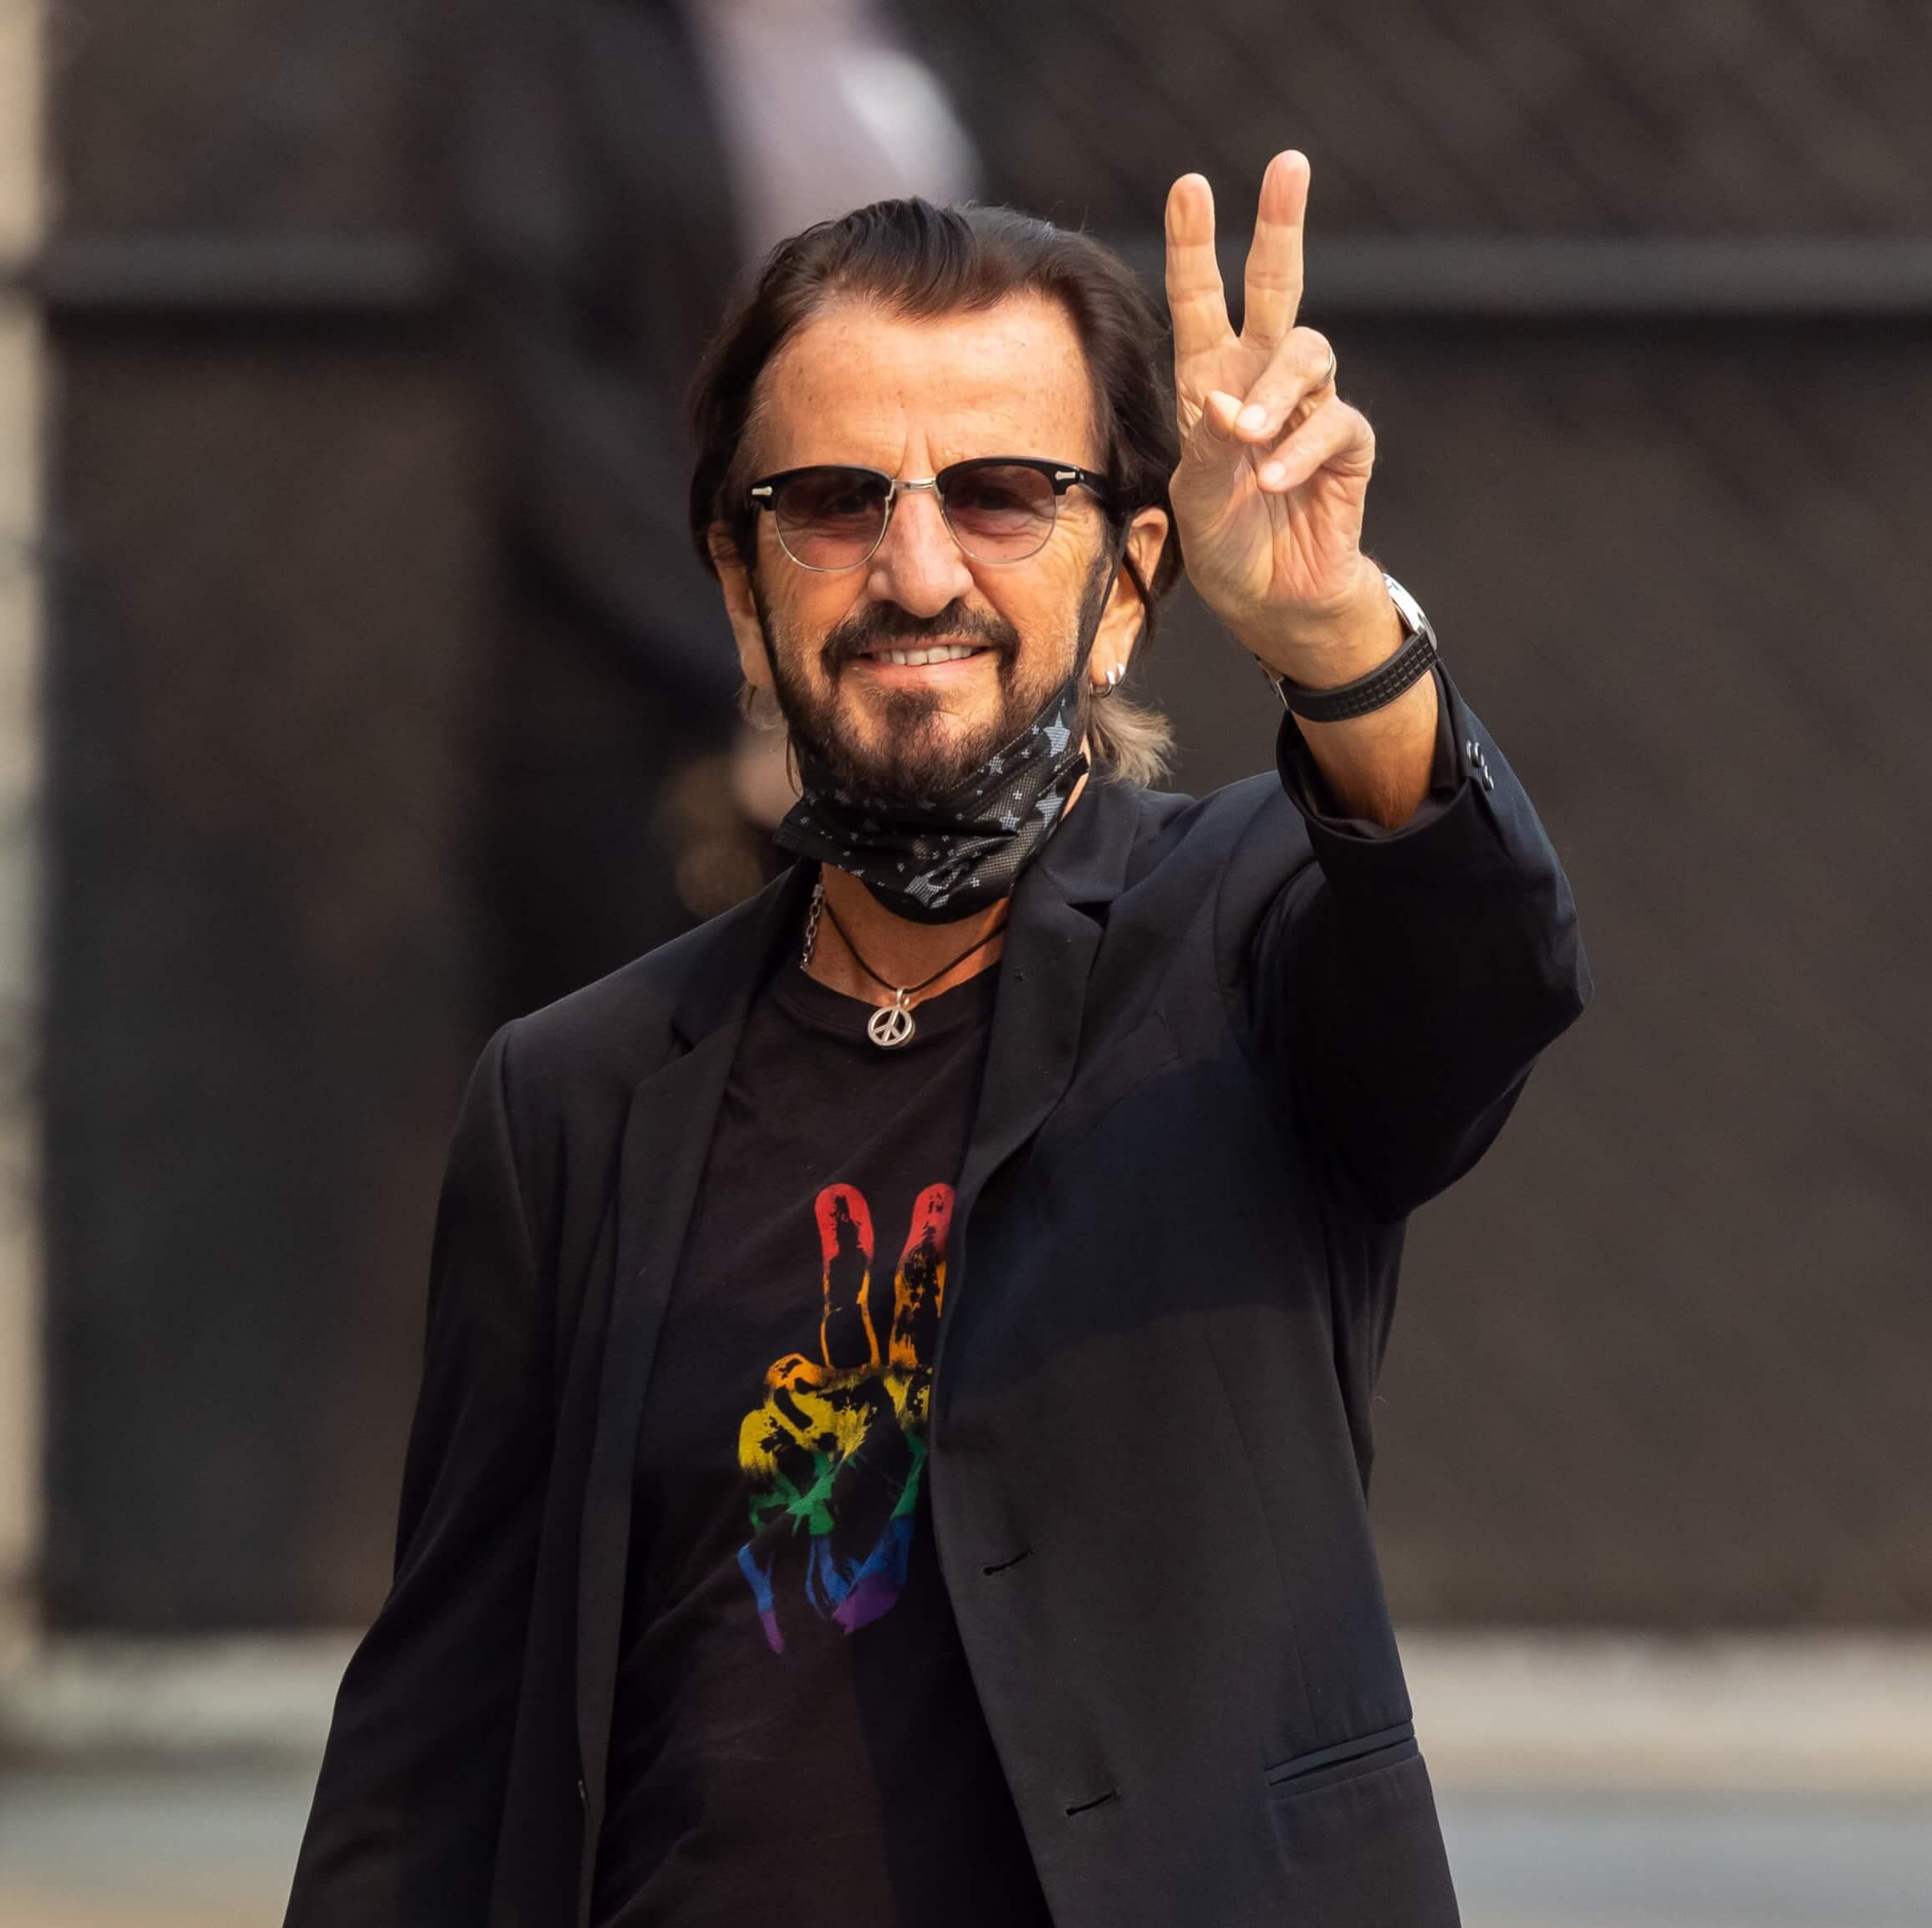 Ringo Starr making a peace sign